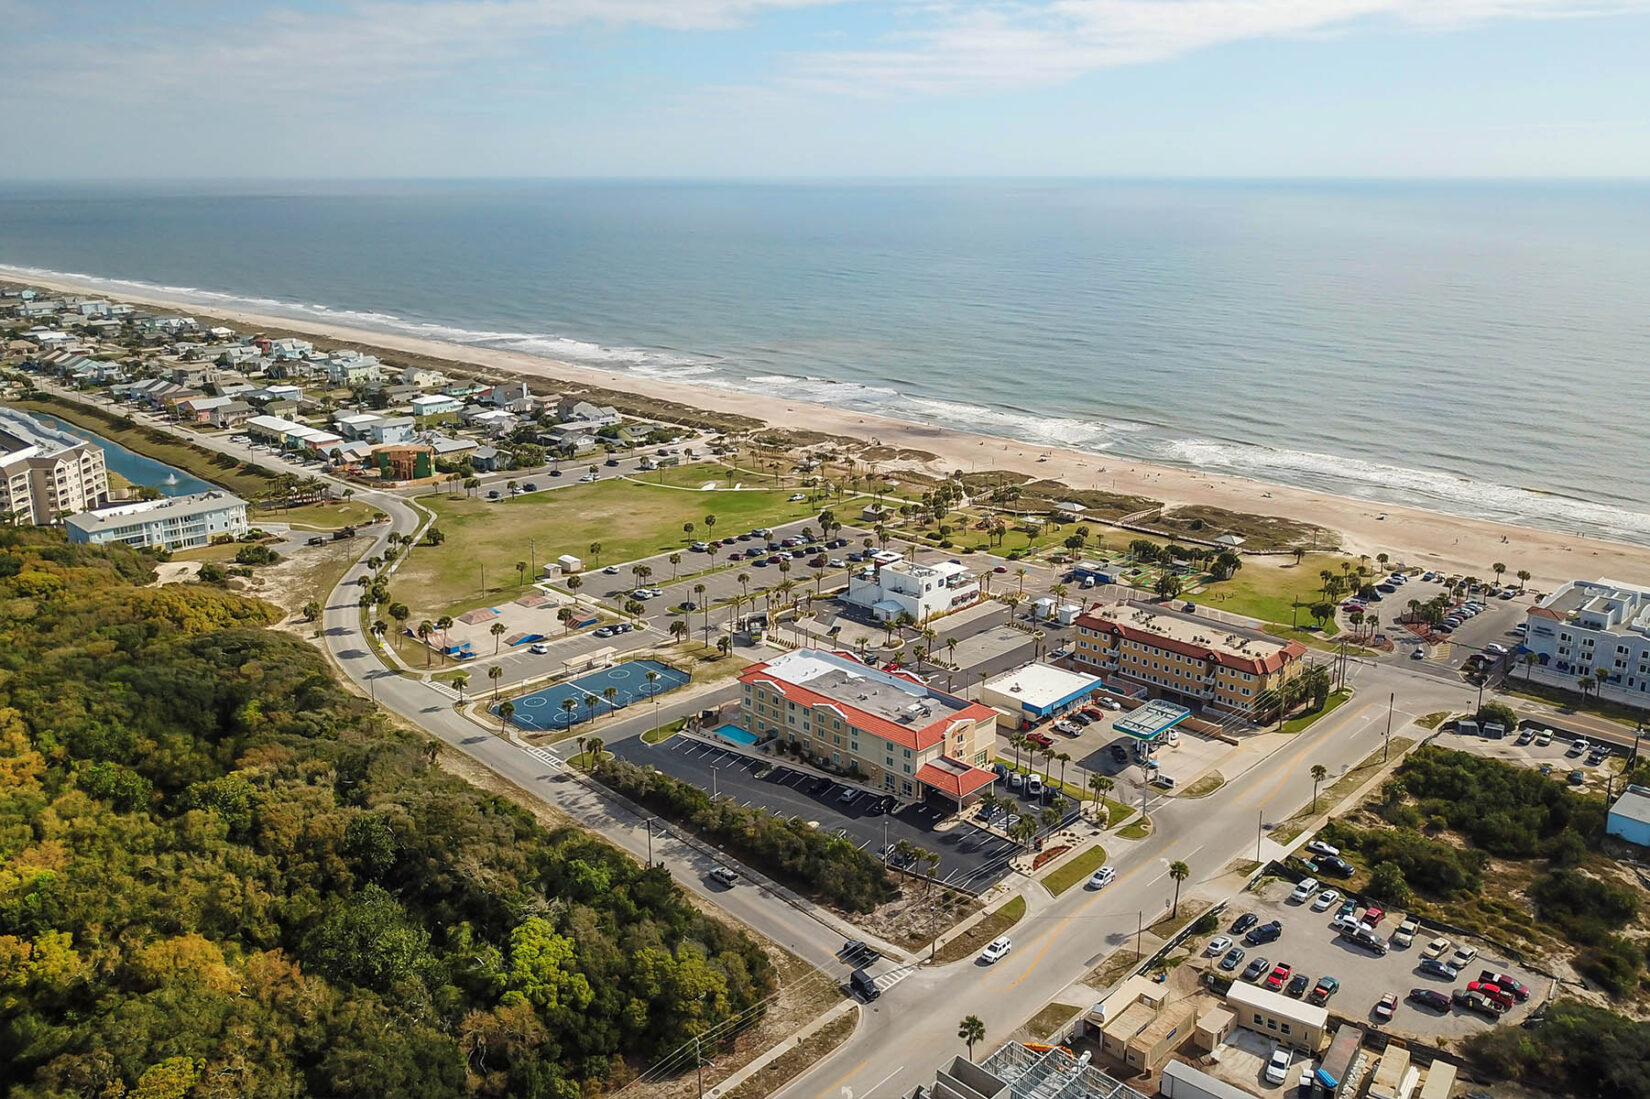 Aerial Photography View of Hotel on the Beach